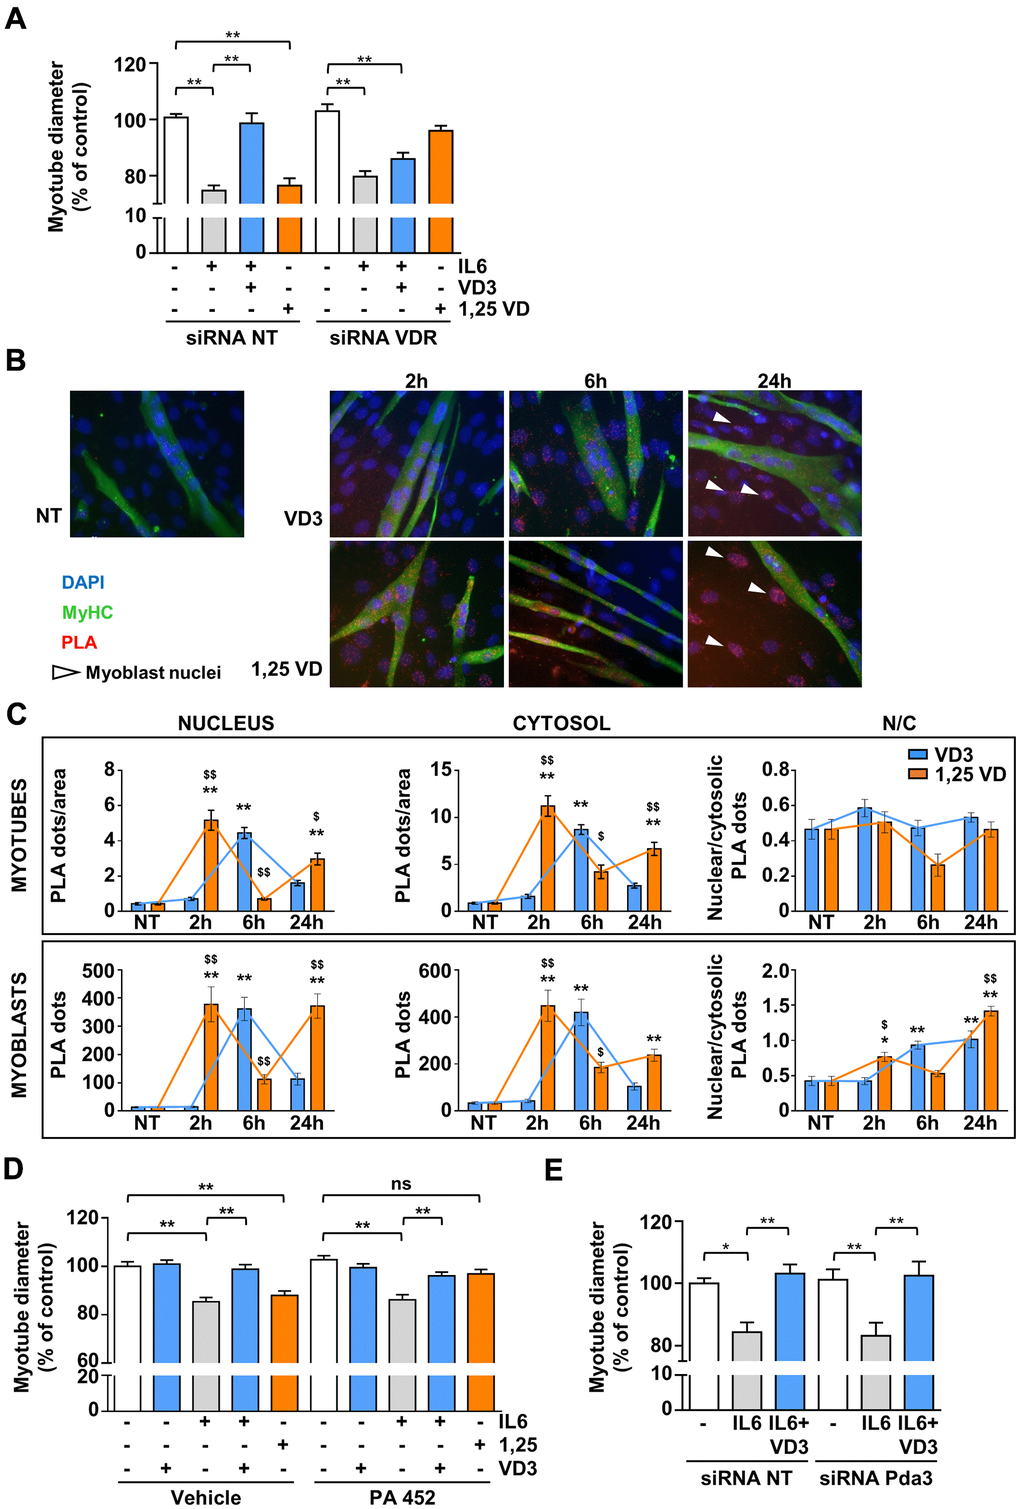 VDR, but not RXR nor 1,25D3-MARRS (Pdia3), mediates VD3 anti-atrophic activity. (A) C2C12 myotubes were transfected with non-targeting or Vdr specific siRNAs. 24 h after silencing, C2C12 myotubes were treated with 20ng/mL IL6 in the absence or presence of 100 nM VD3 or with 100 nM 1,25VD, and myotube diameters were measured after further 24 h. (B) Representative images of the PLA-detected complexes of VDR and RXR (red) in C2C12 myotubes (green) treated for the indicated times with 100 nM VD3 or 100 nM 1,25VD. Nuclei were stained with DAPI. The white arrows indicate the nuclei of bone fide residual undifferentiated myoblasts. (C) Quantification of the PLA dots in myotubes (top) or myoblasts (bottom), in nuclei (left), cytoplasm (middle), and their ratio (right). (D) Myotube diameters of C2C12 treated with 20ng/mL IL6, with or without 100 nM VD3, or with 100 nM 1,25VD, in the presence/absence of 2.5 μM RXR inhibitor PA 452. (E) C2C12 myotubes were transfected with non-targeting or Pdia3 specific siRNAs, treated with 20ng/mL IL6 in the absence or presence of 100 nM VD3 and analyzed after further 24 h. Data are presented as the mean ± SEM. *P P P $P $$P 